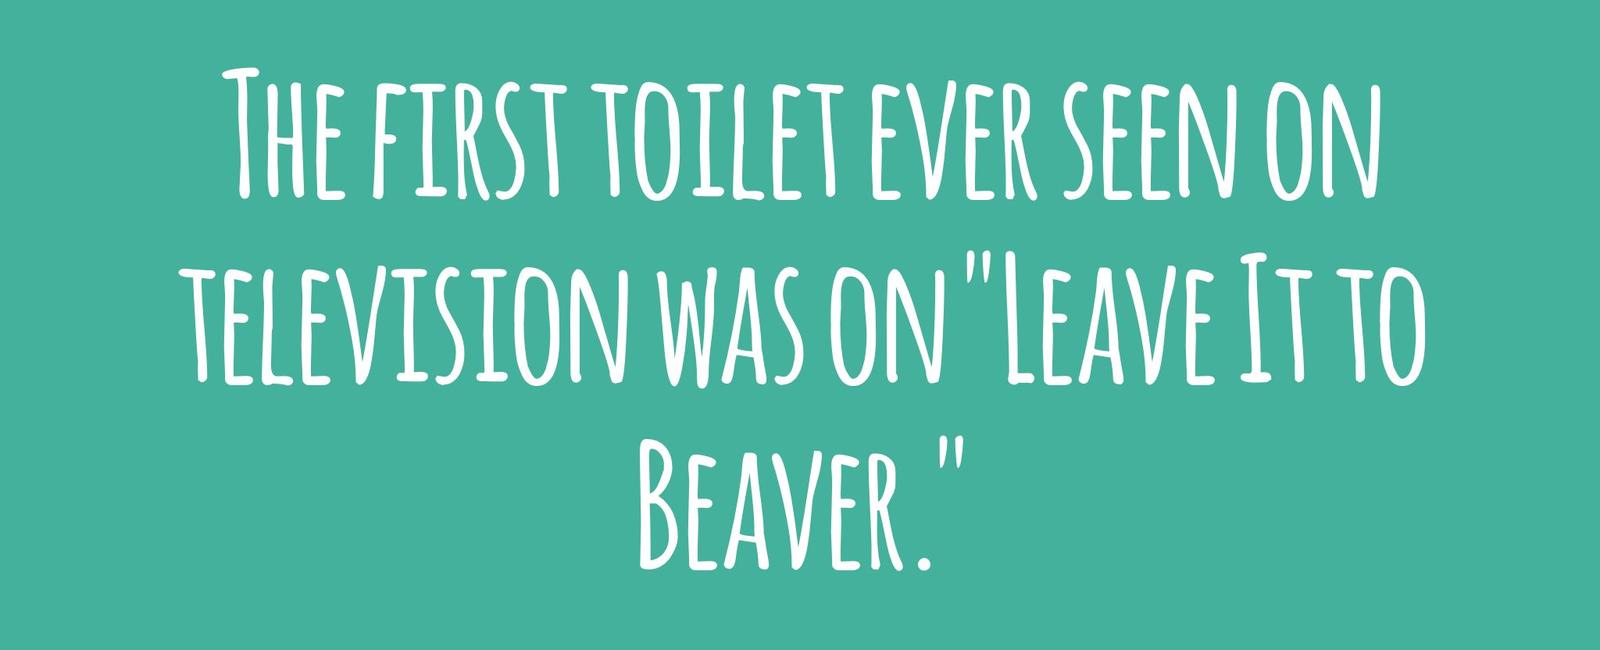 The first toilet ever seen on television was on leave it to beaver